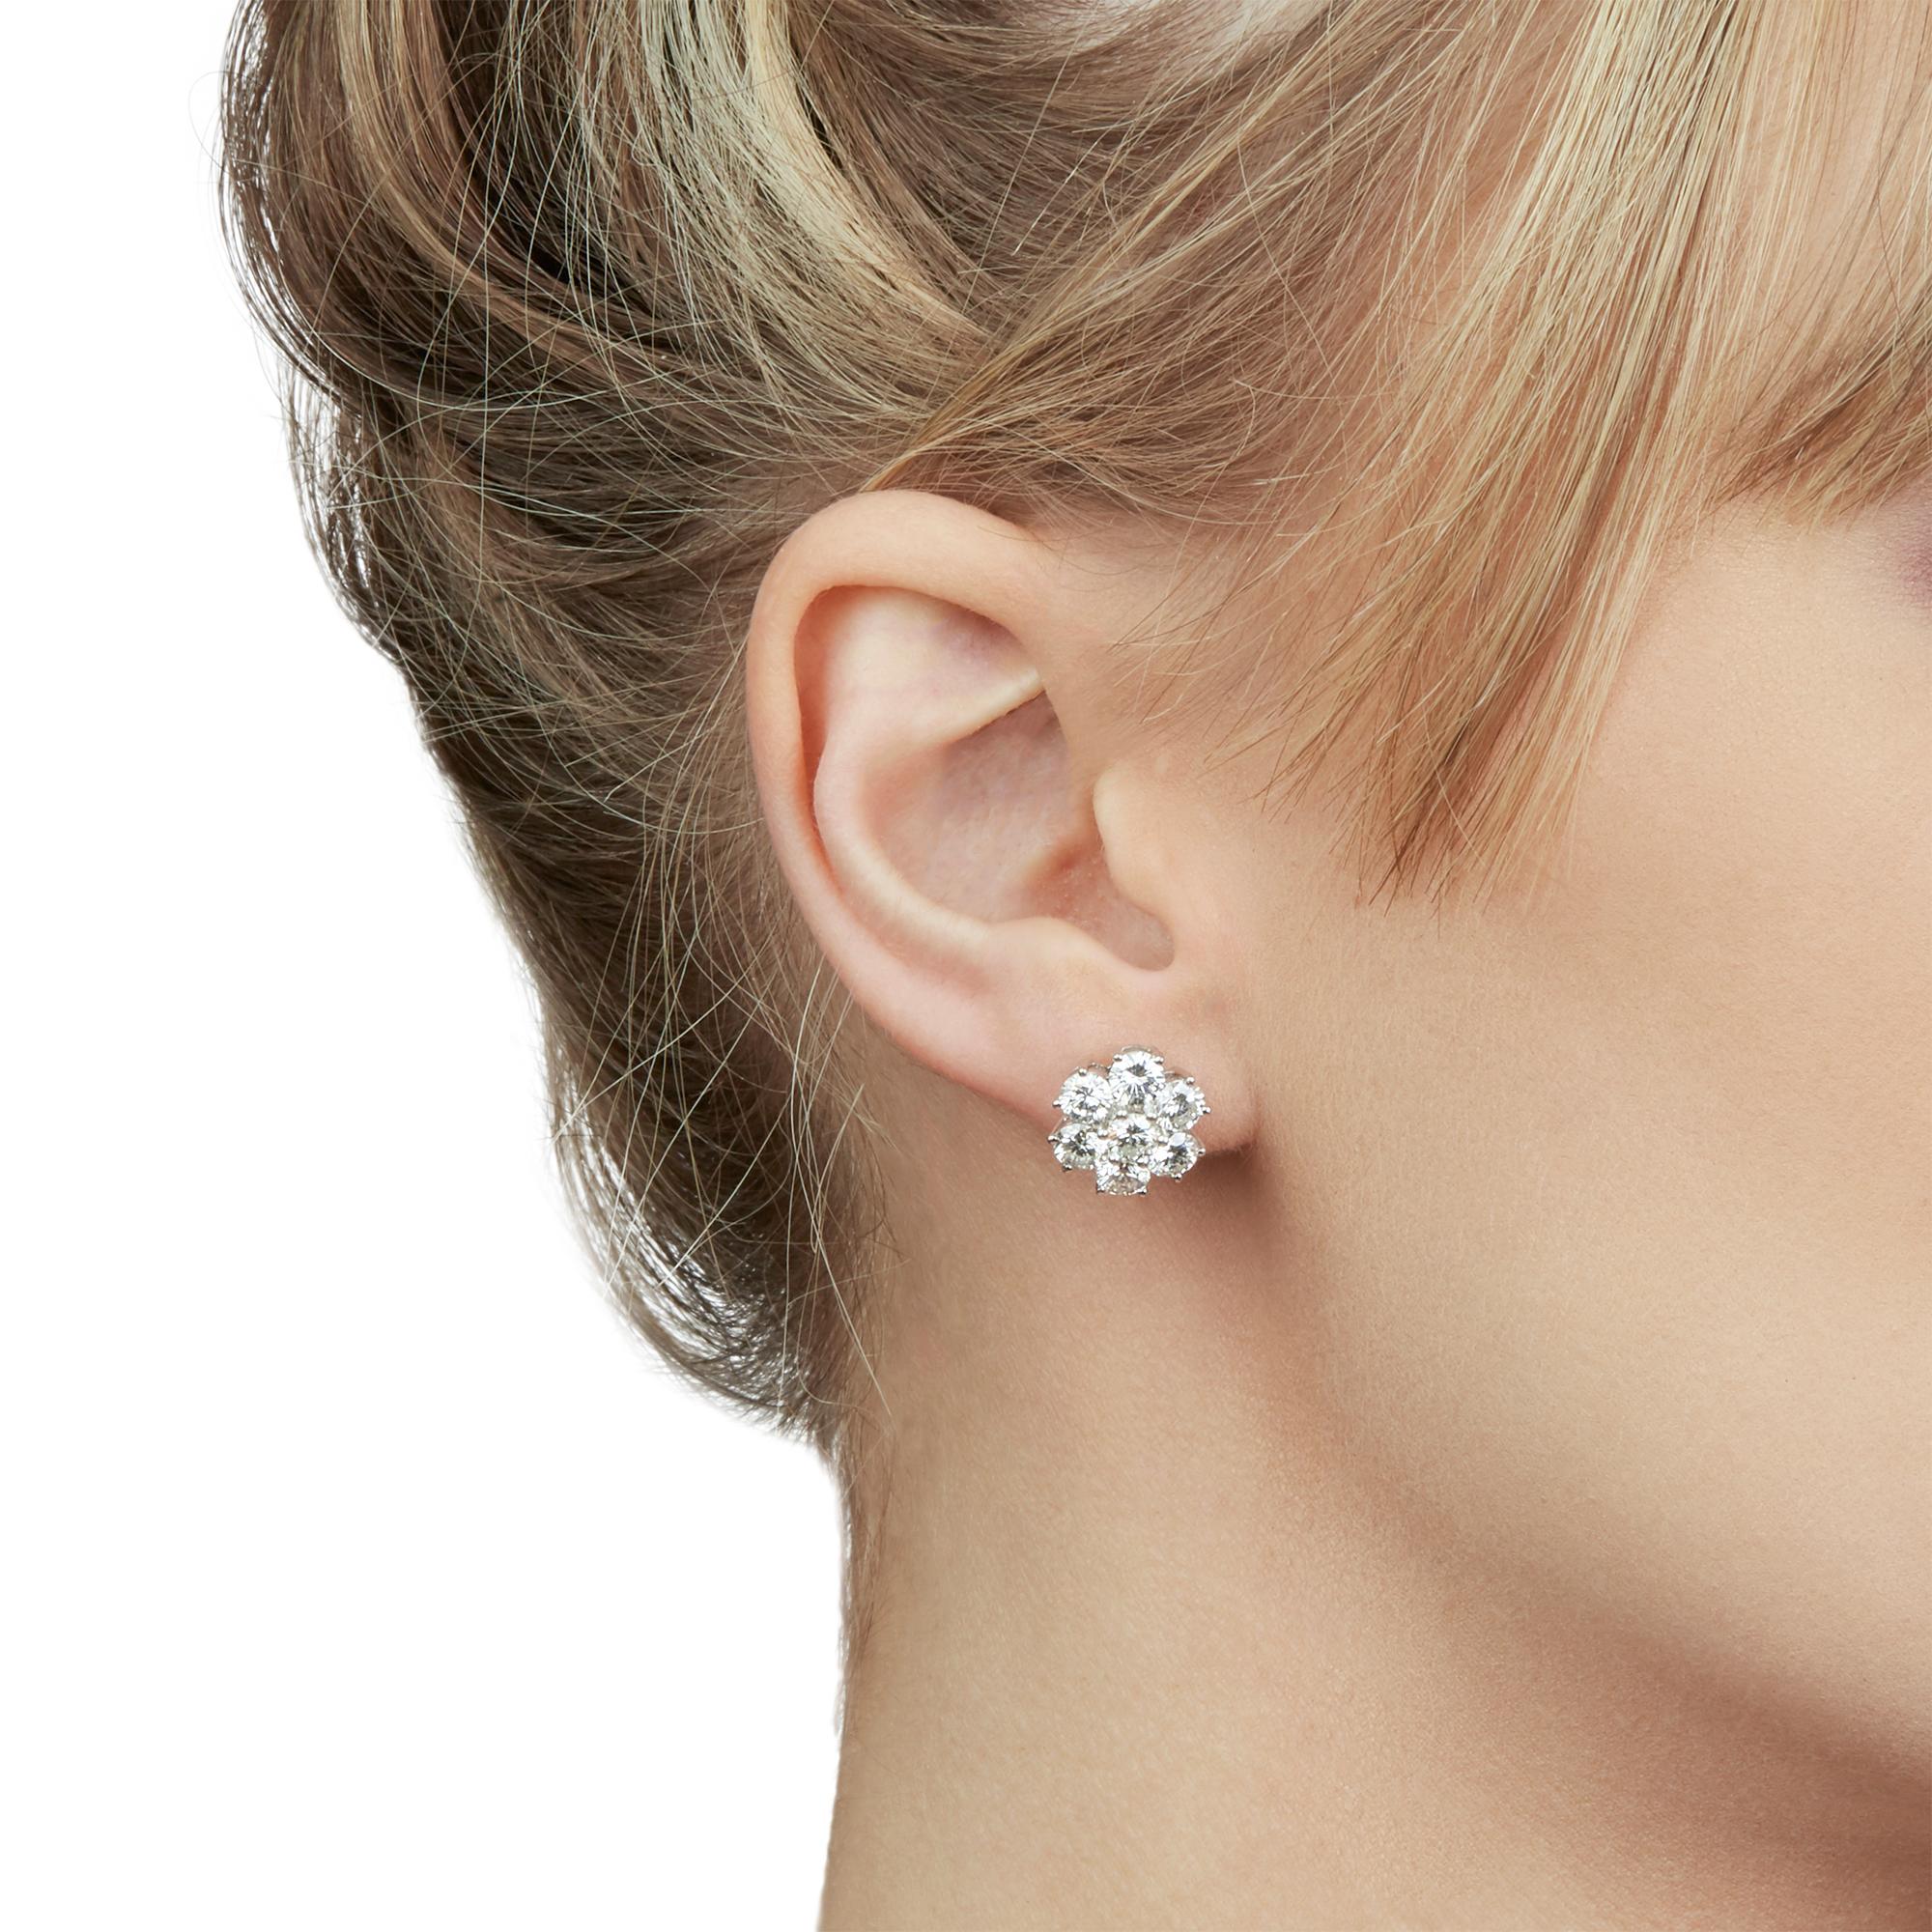 Code: COM2177
Brand: Boodles
Description: 18k White Gold Diamond Cluster Stud Earrings
Accompanied With: Presentation Box
Gender: Ladies
Earring Length: 1.2cm
Earring Width: 1.2cm
Earring Back: Friction
Condition: 9
Material: White Gold
Total